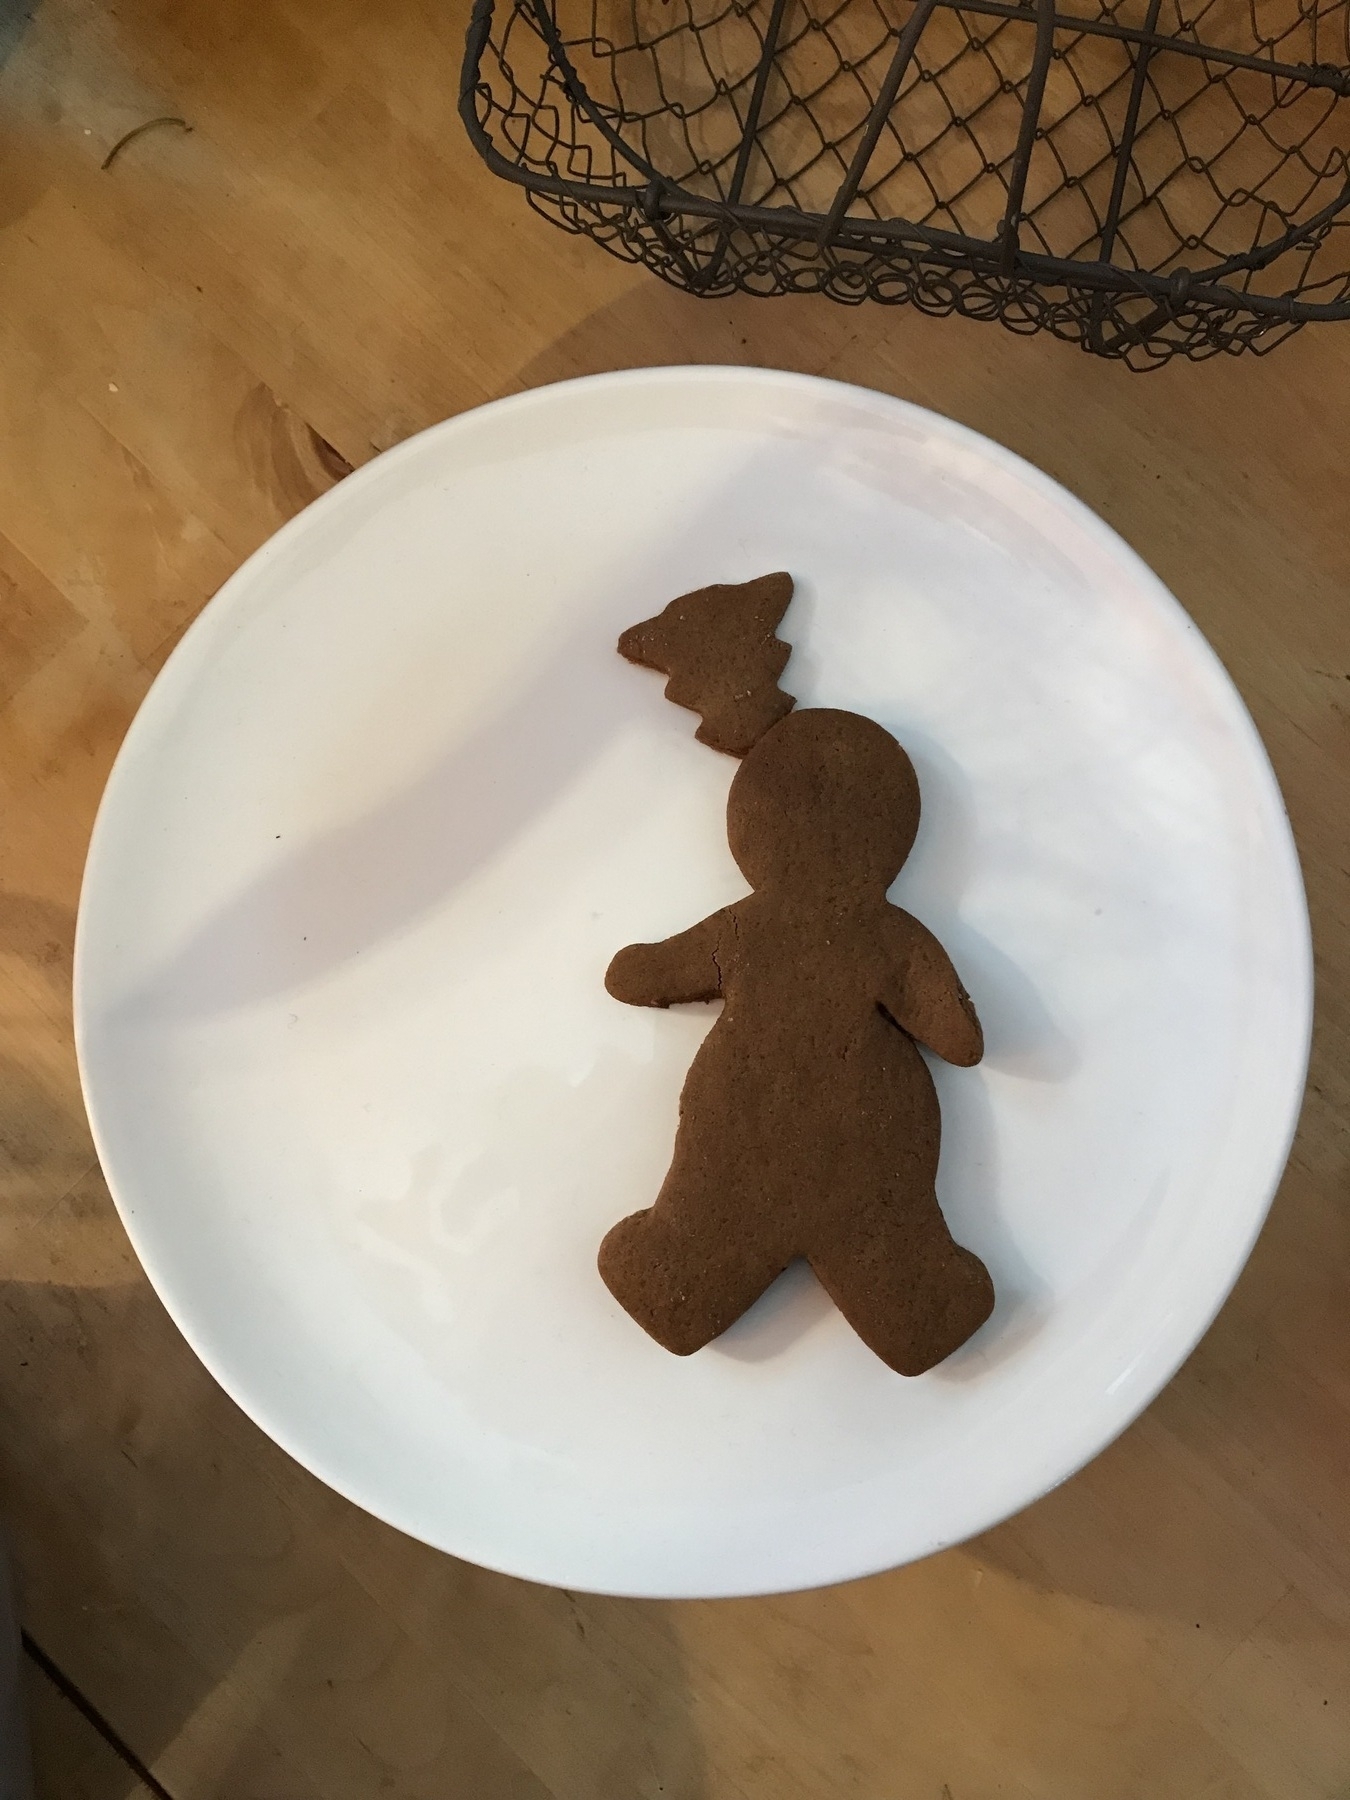 Gingerbread man with gingerbread tree stuck in his head